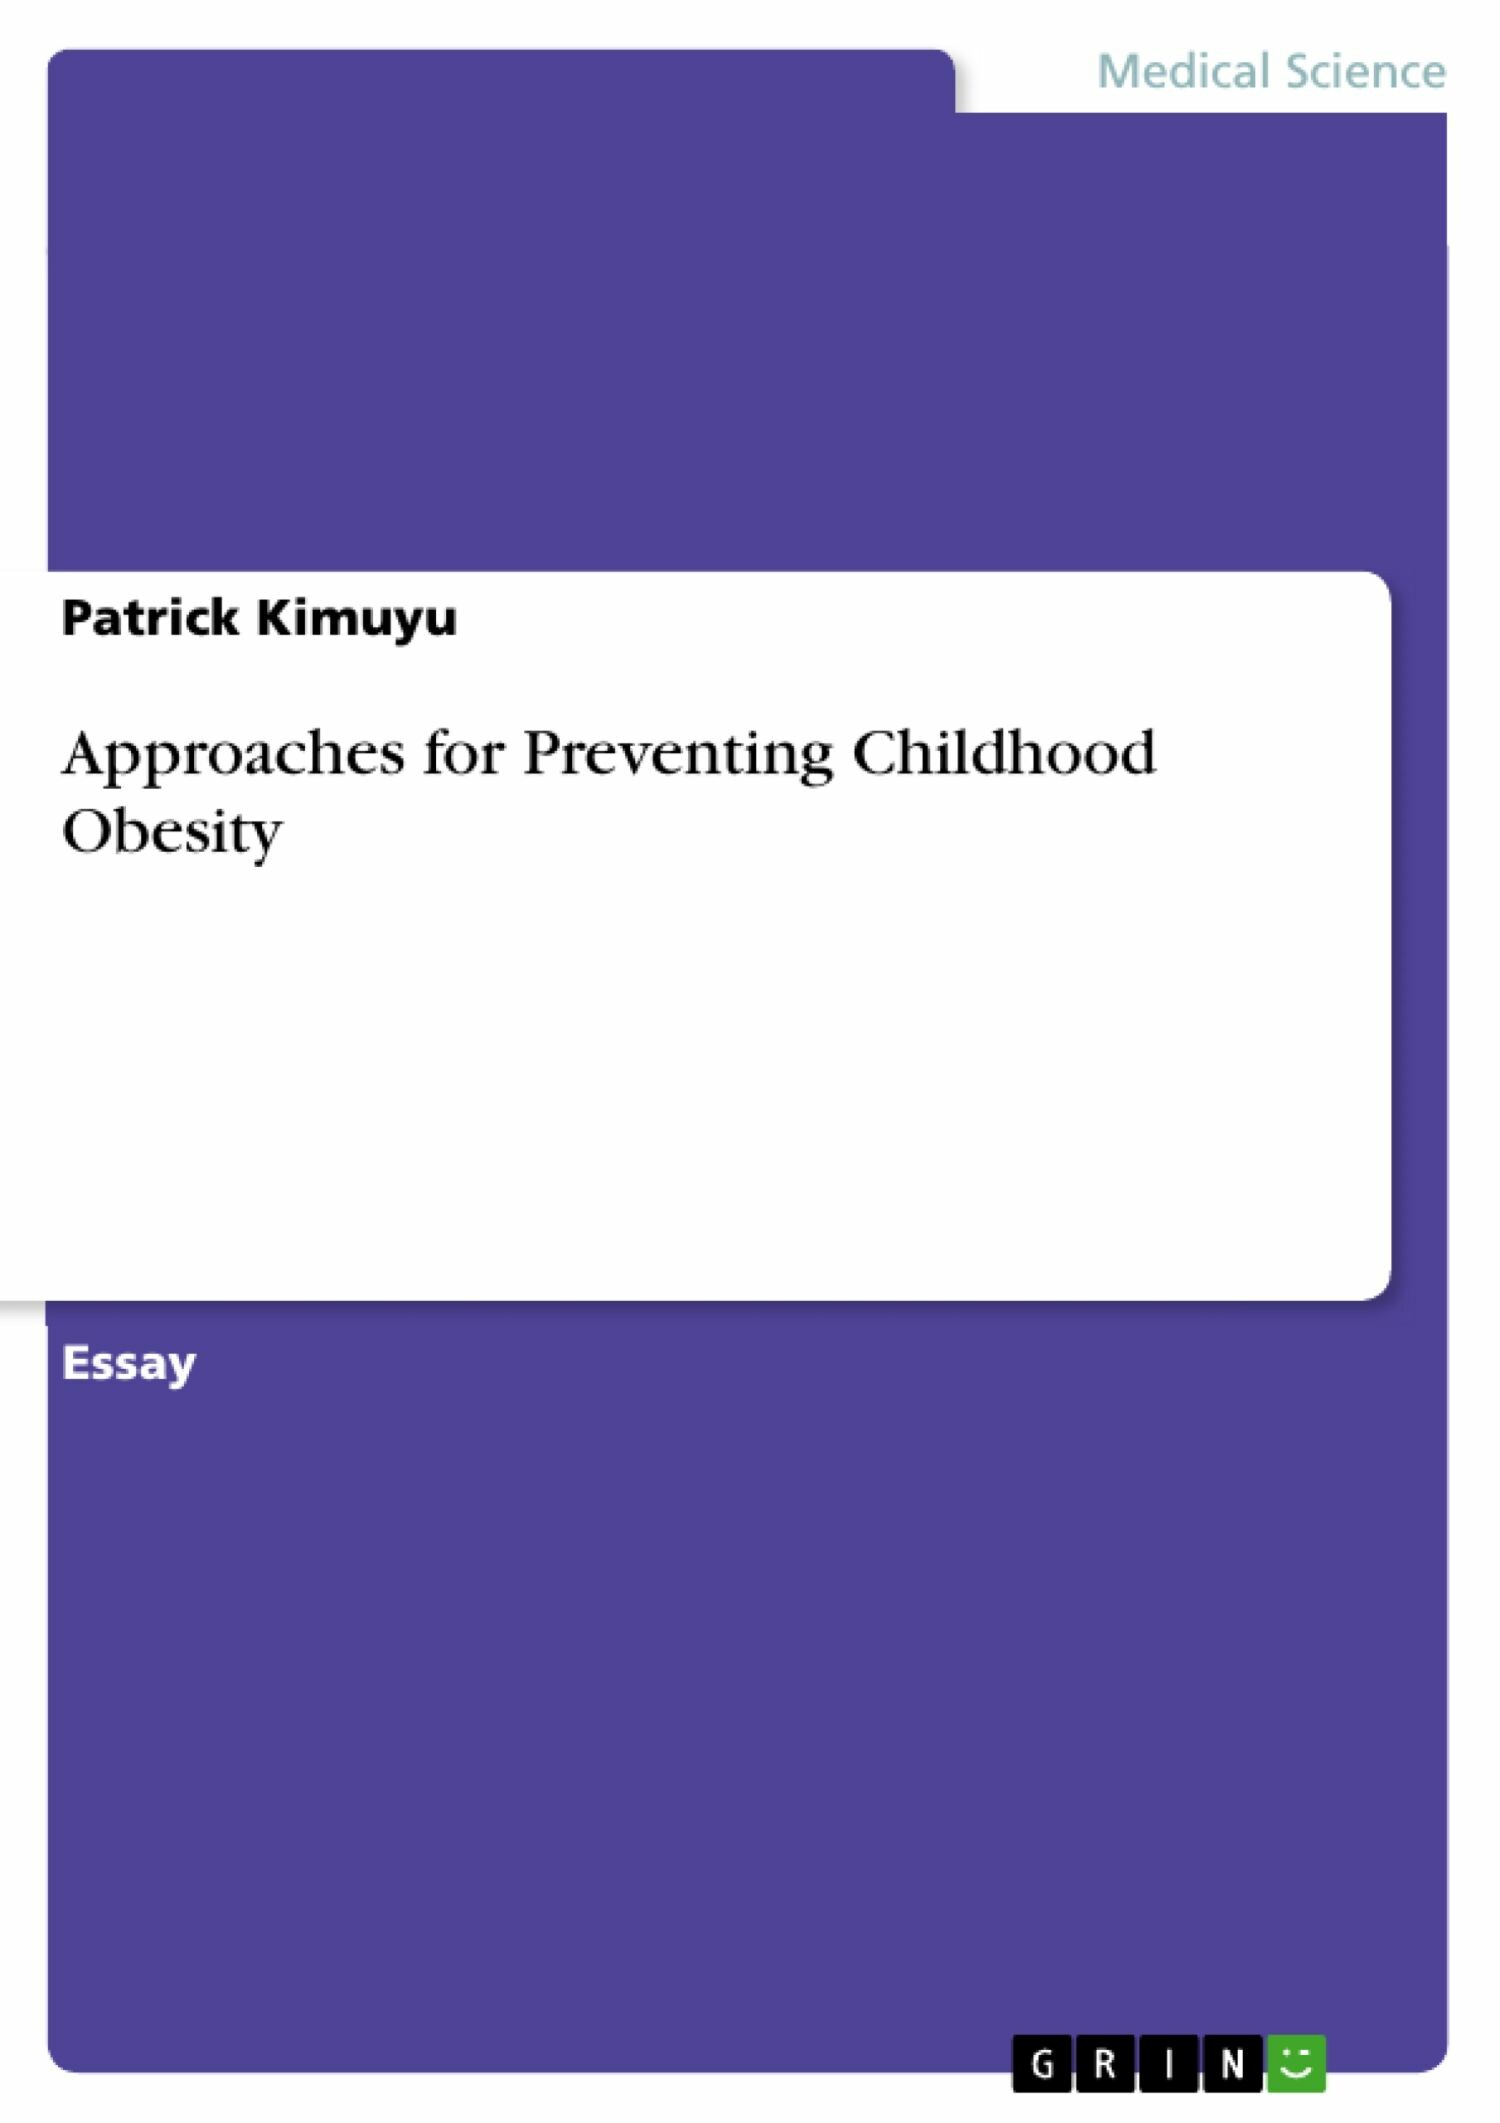 Approaches for Preventing Childhood Obesity